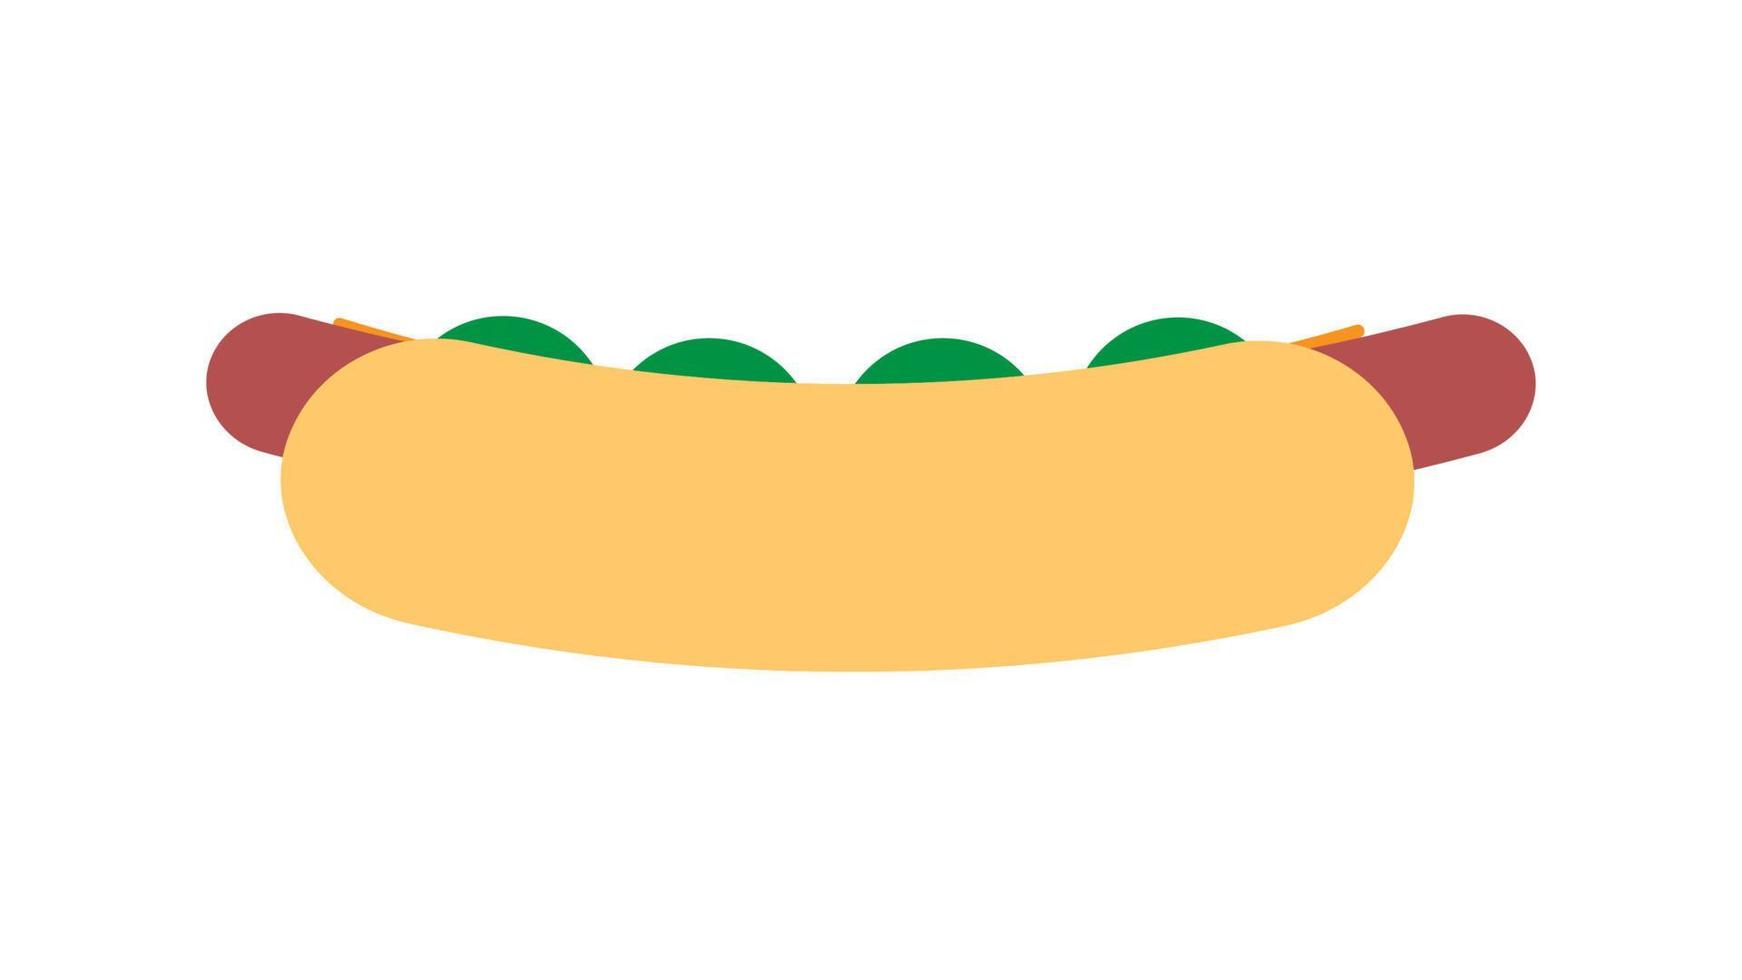 hot dog on white background, vector illustration. bun with sausage, ketchup, mustard. hearty stuffing of sausages, cheese, herbs, unhealthy snack. food truck sandwich